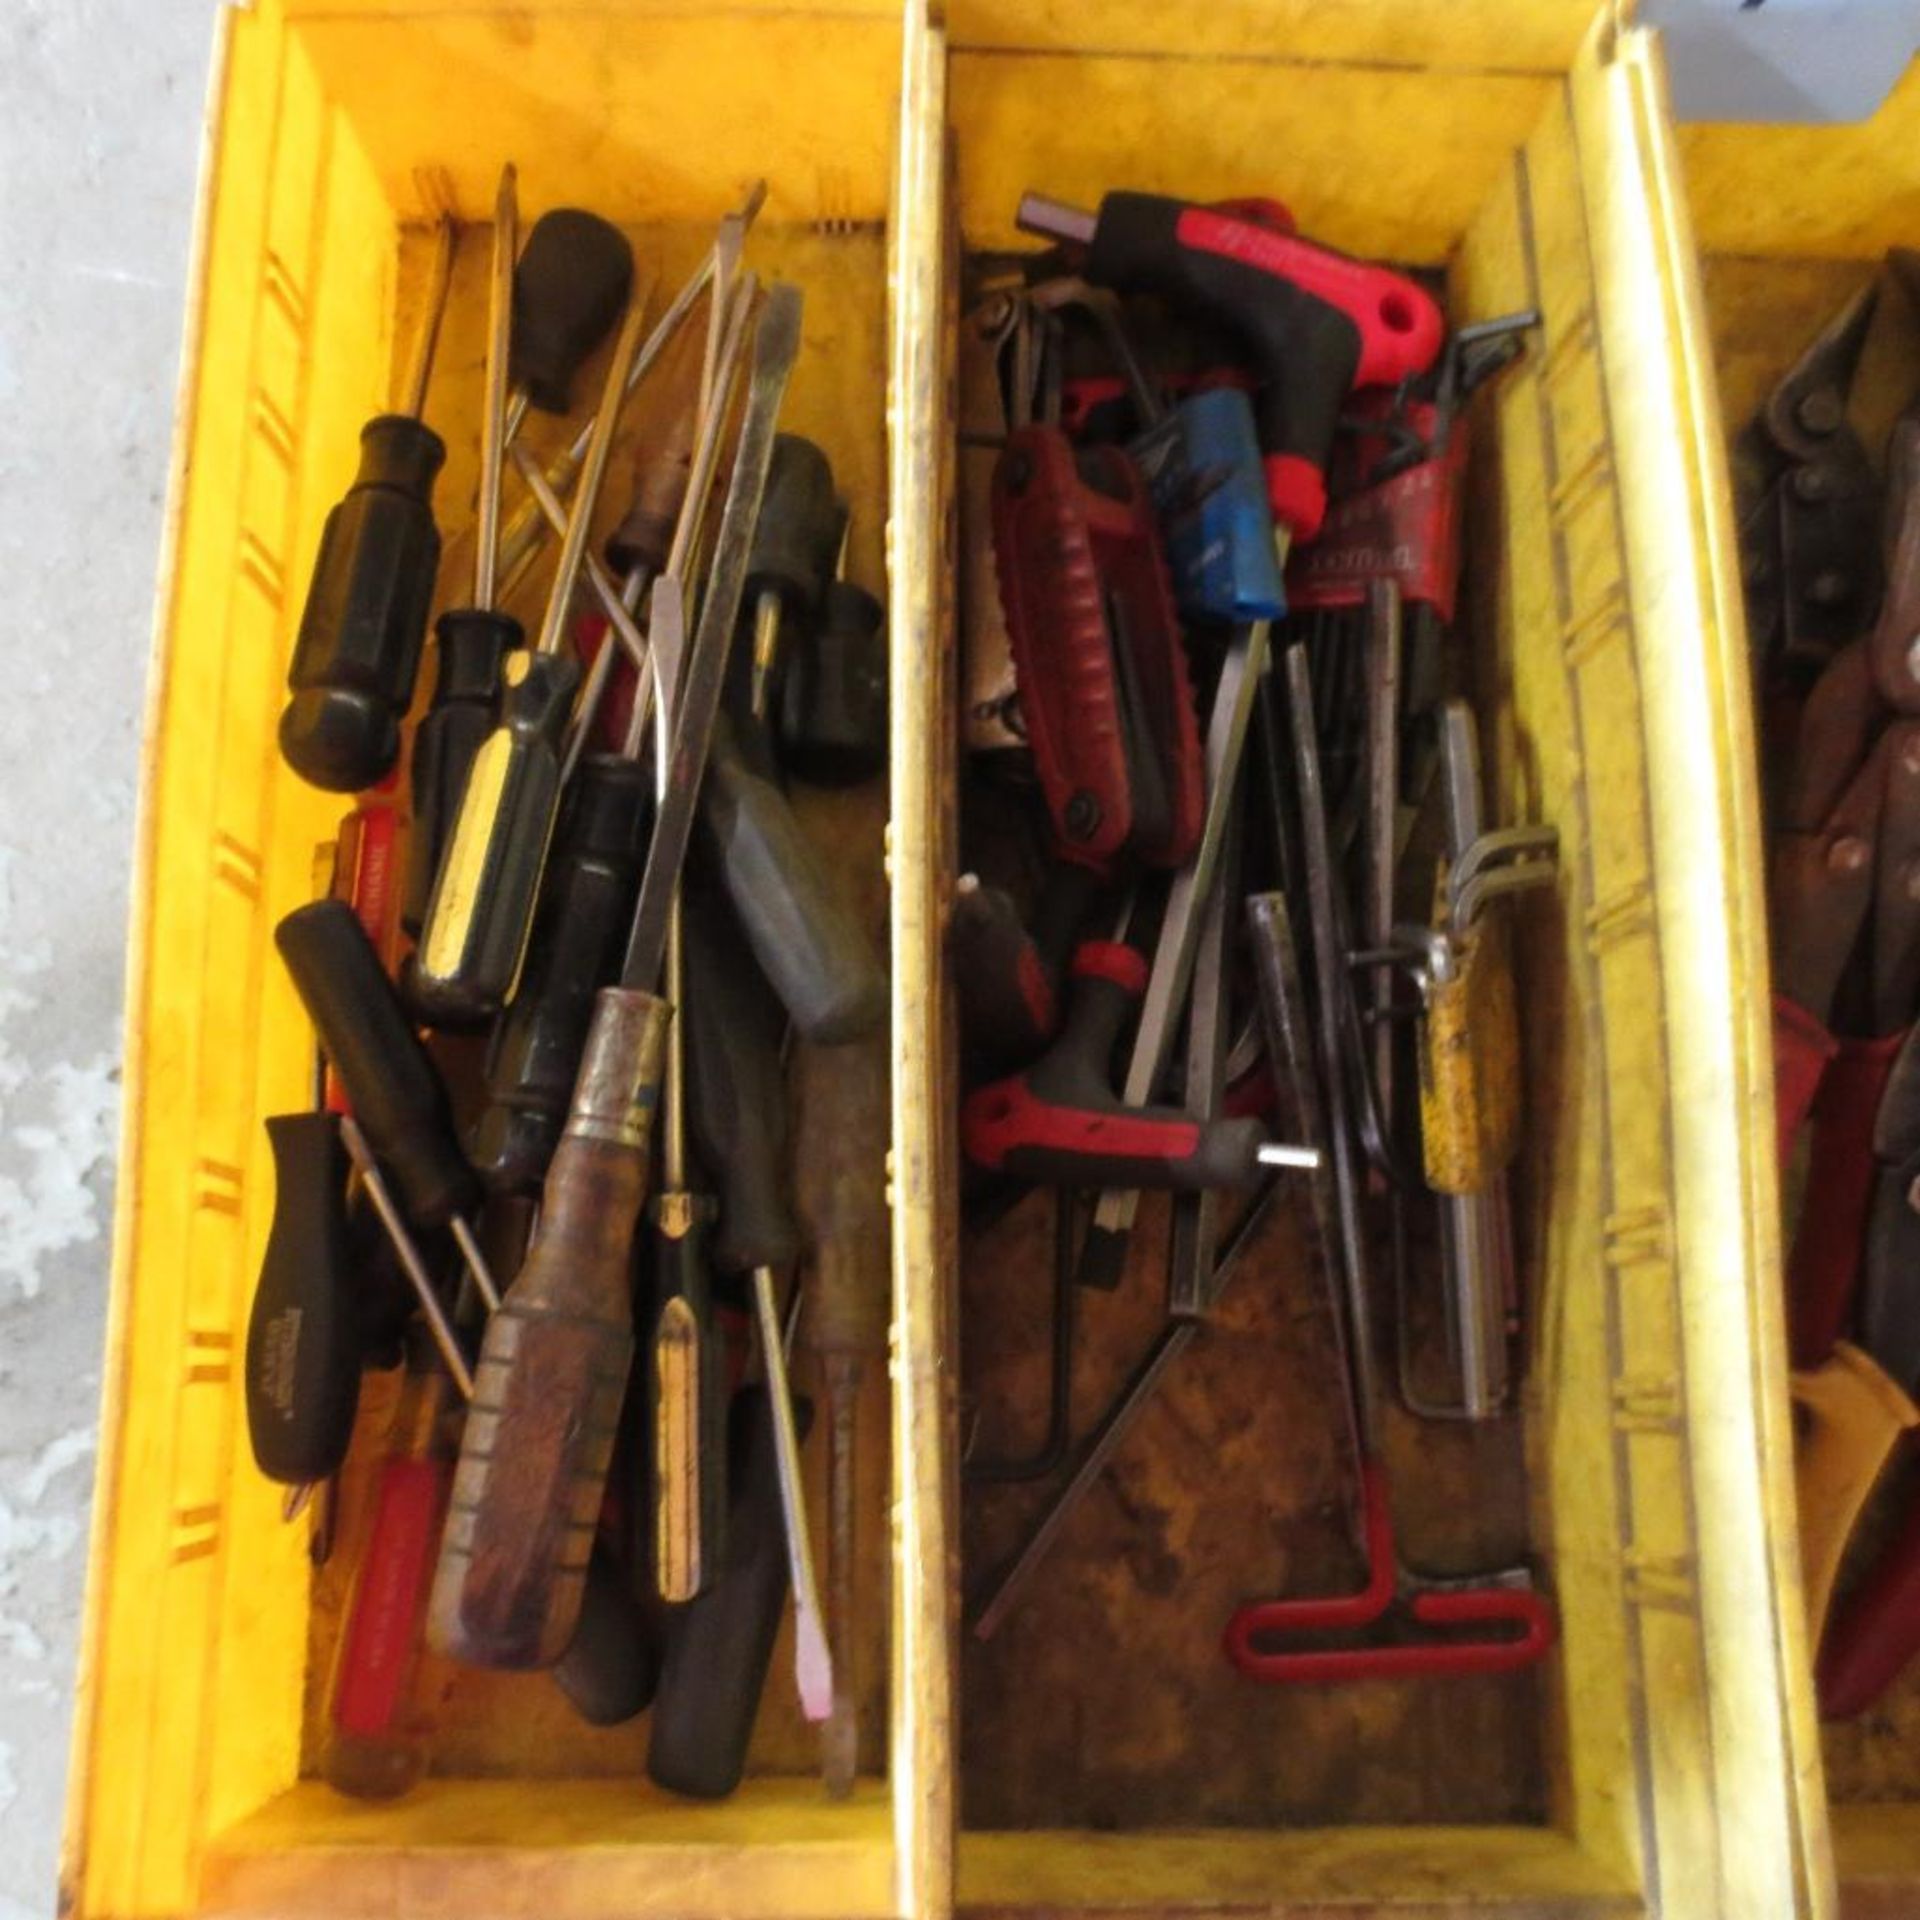 Screw Drivers, Allen Wrenches, Tin Snips and Wrenches - Image 2 of 3